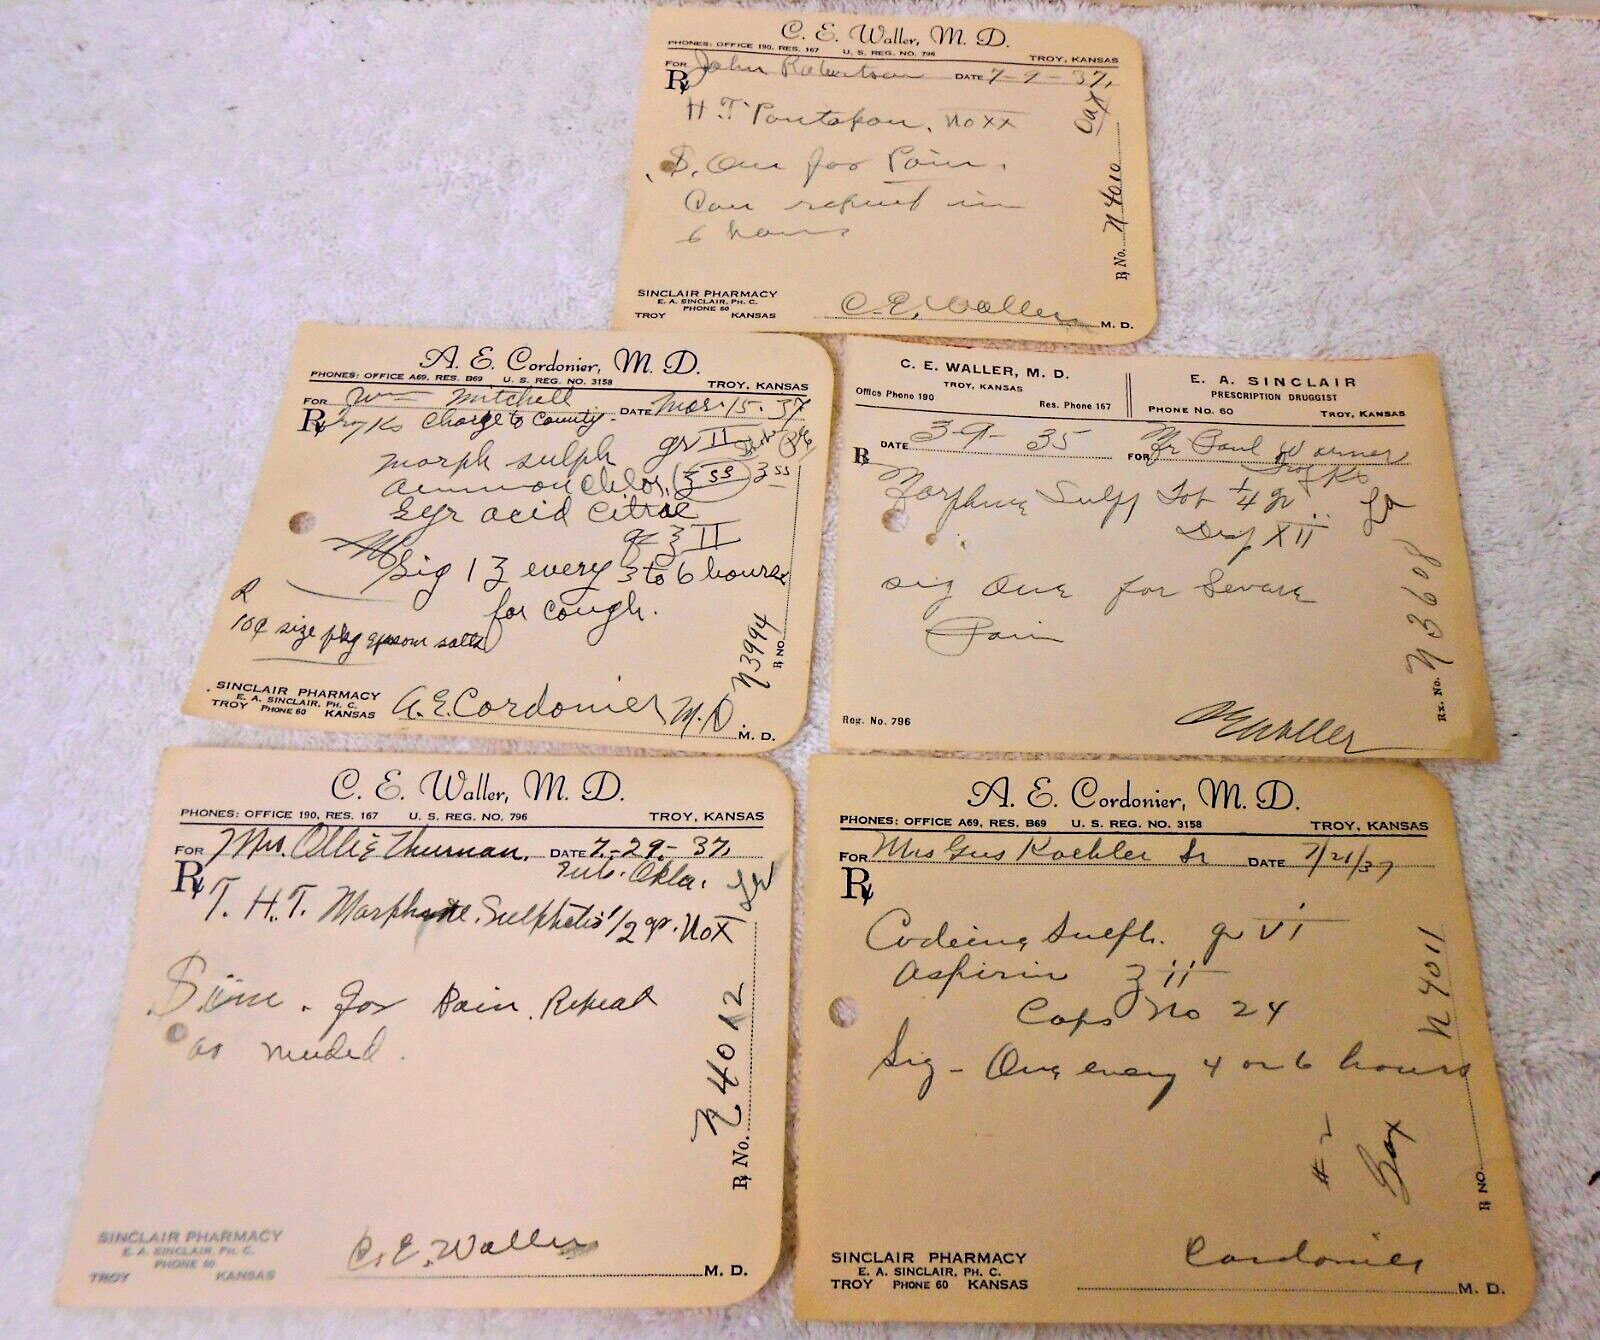 Lot of 5 1930s Narcotic Prescriptions,3 Morphine Sulfate 1 Codeine & HJ Pentapan